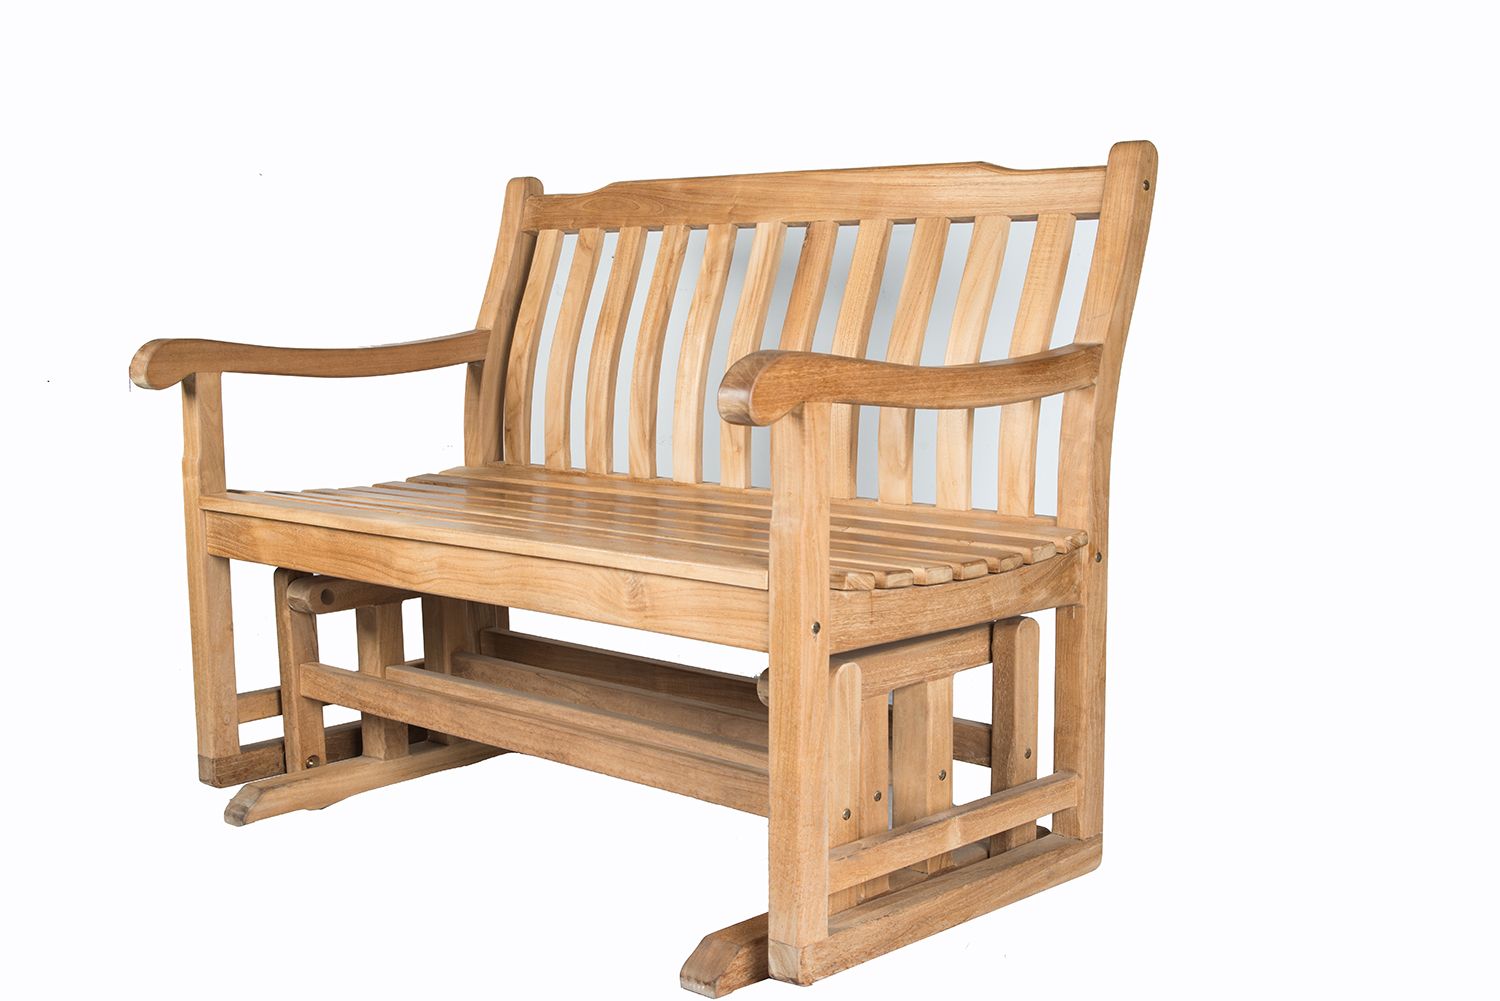 Shop For Dewata Classic Teak Wood B+ Class Glider Bench Pertaining To Teak Glider Benches (View 16 of 25)